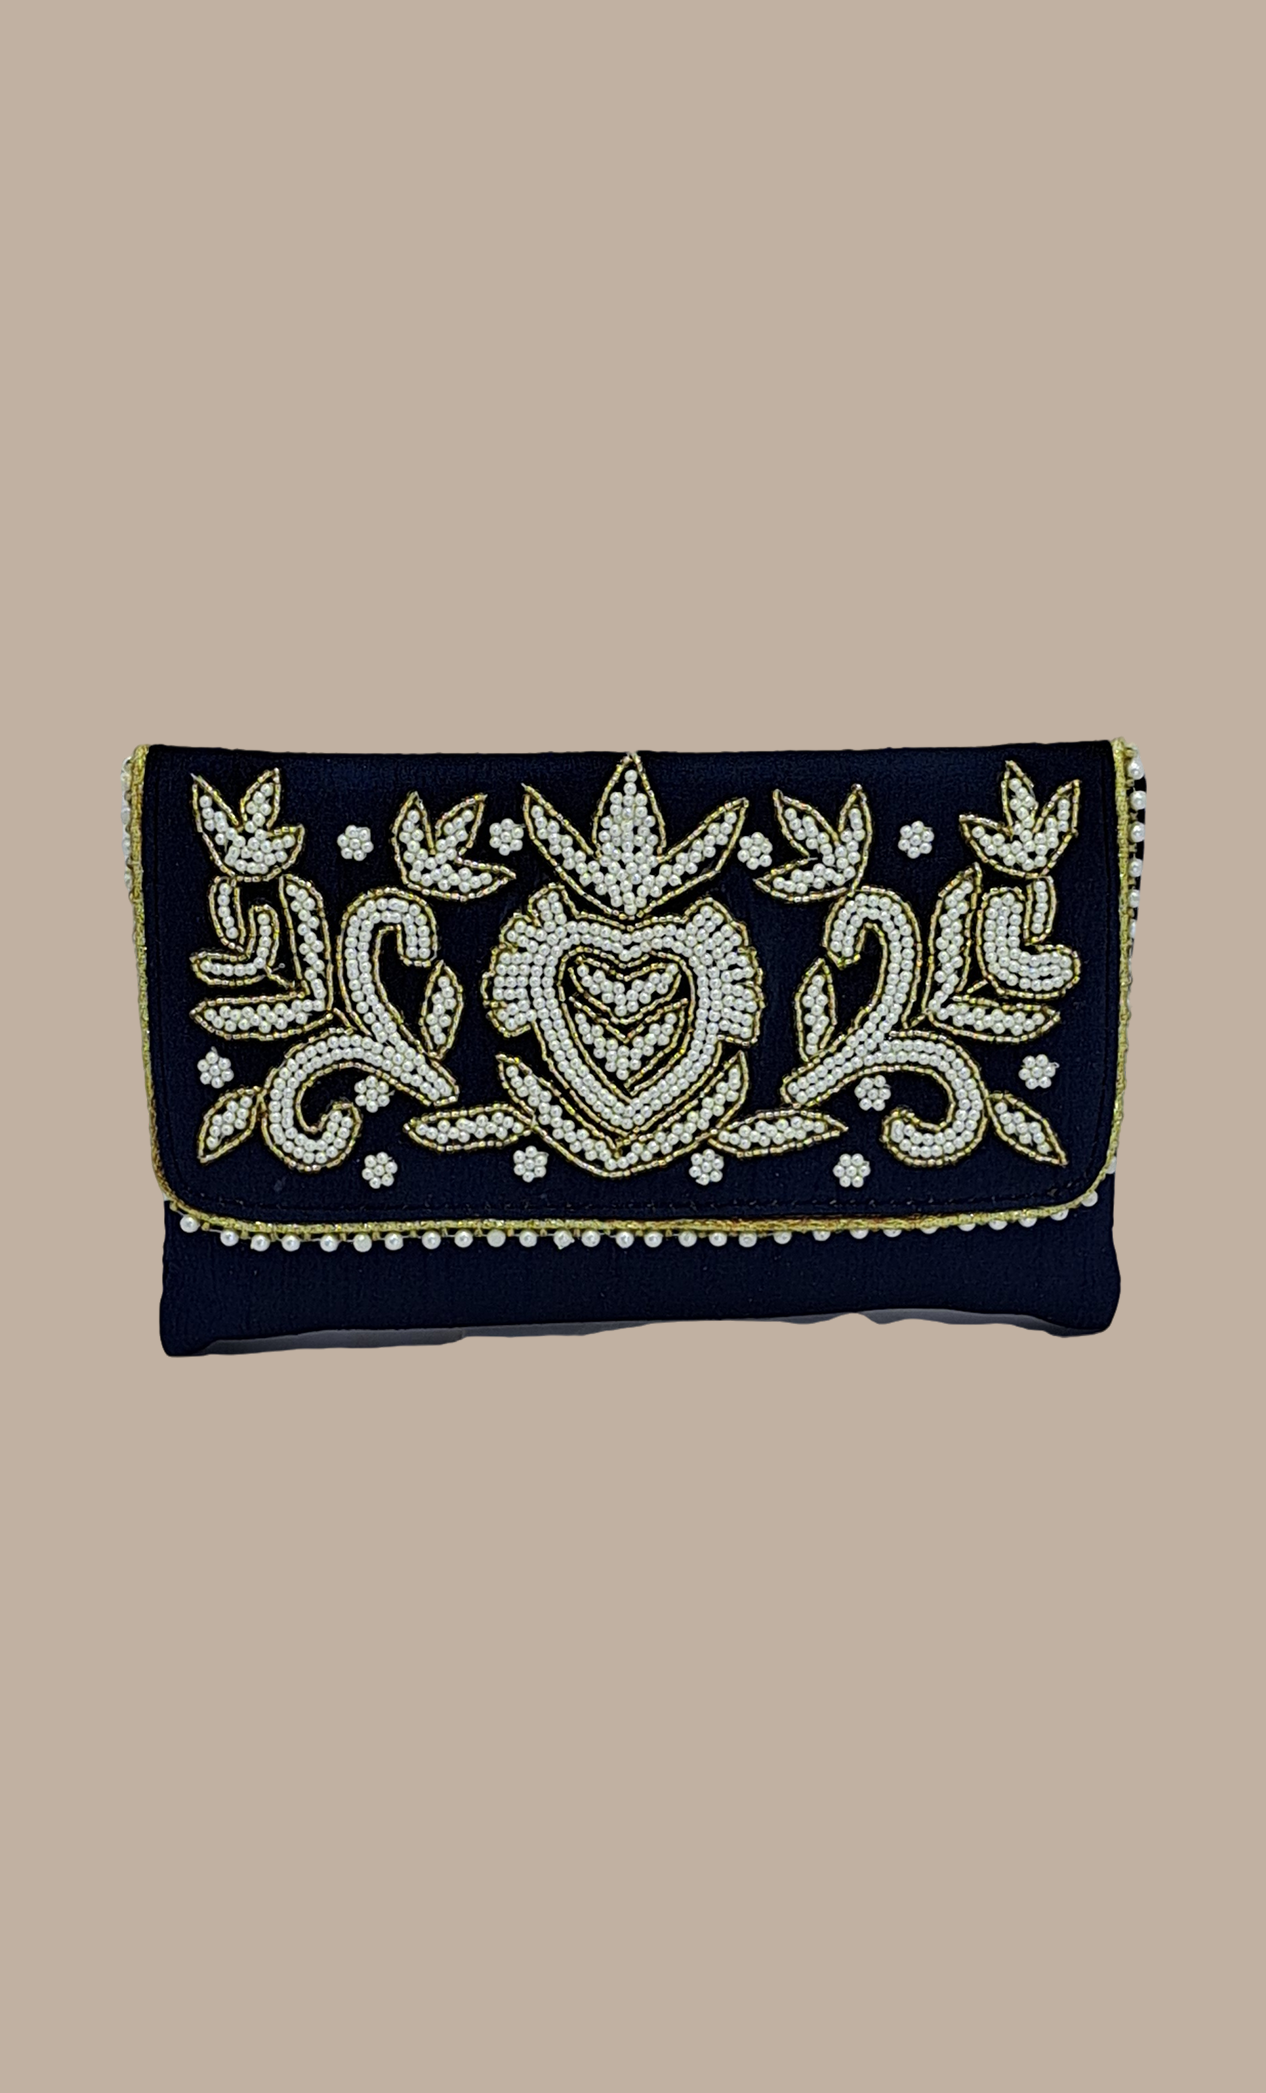 Navy Embroidered Clutch Bag